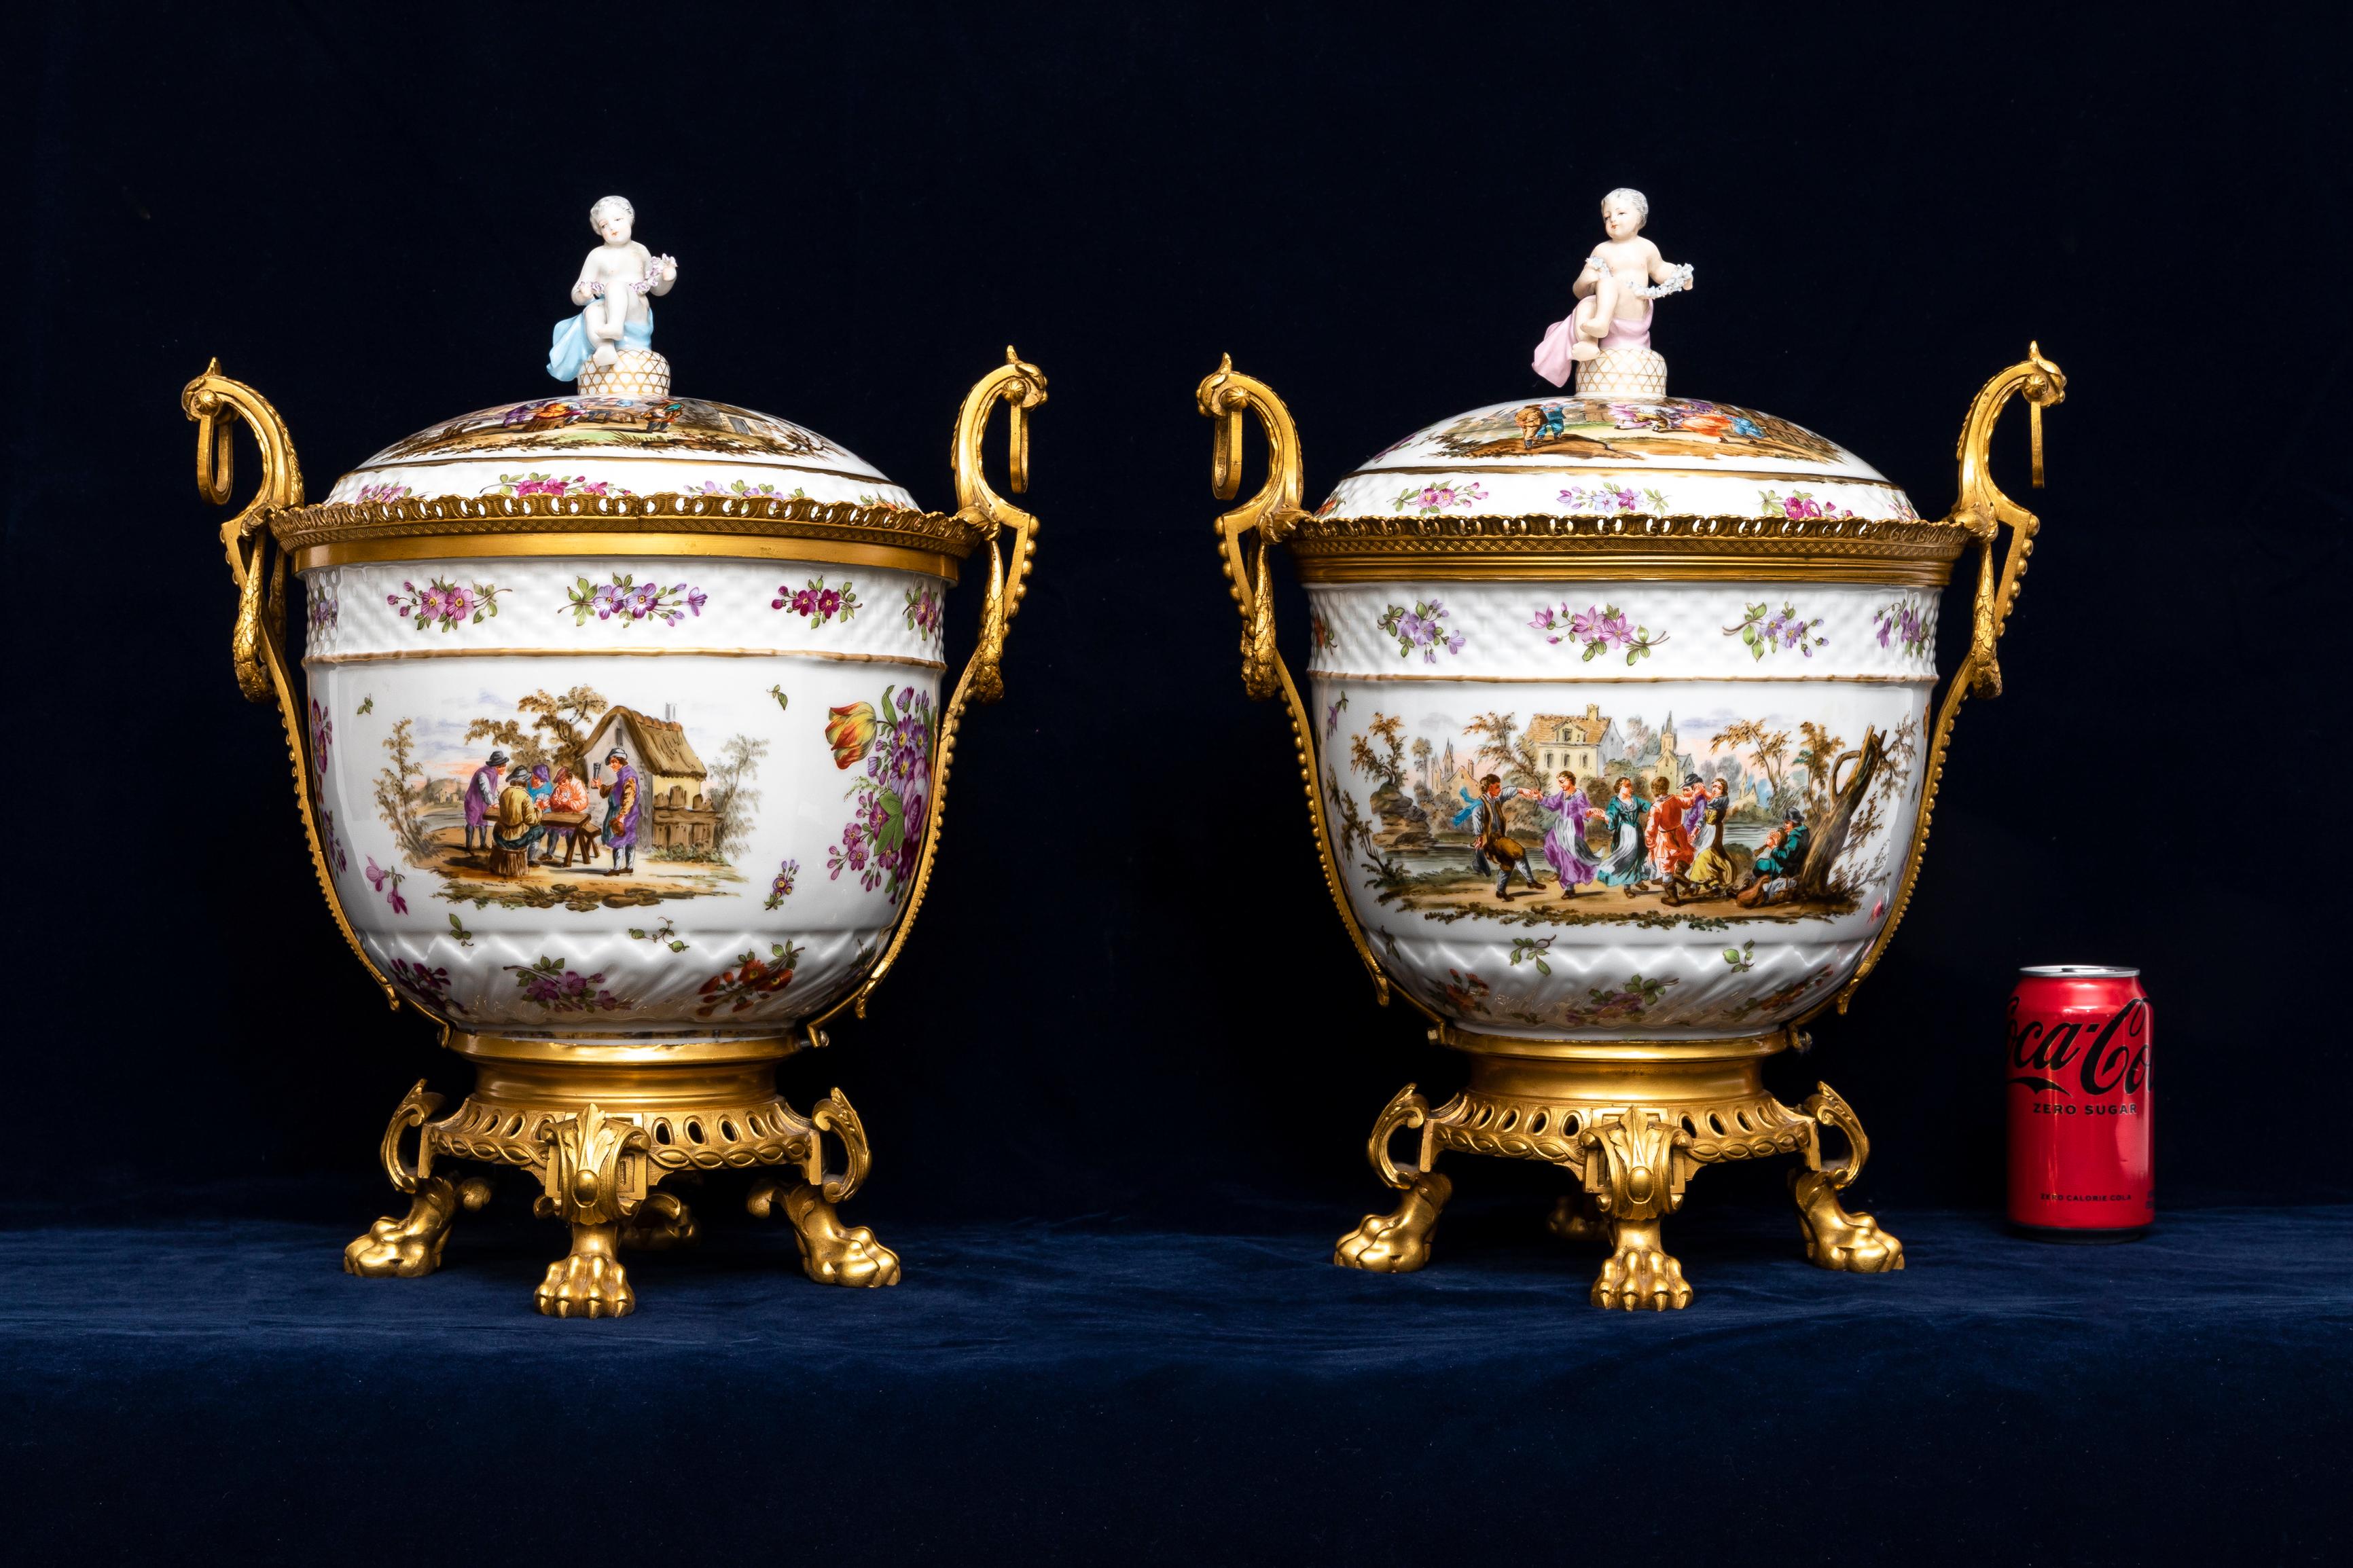 Louis XVI Pair 18th C. Meissen Porcelain Covered Tureens w/ 19th C. French Ormolu Mounts For Sale